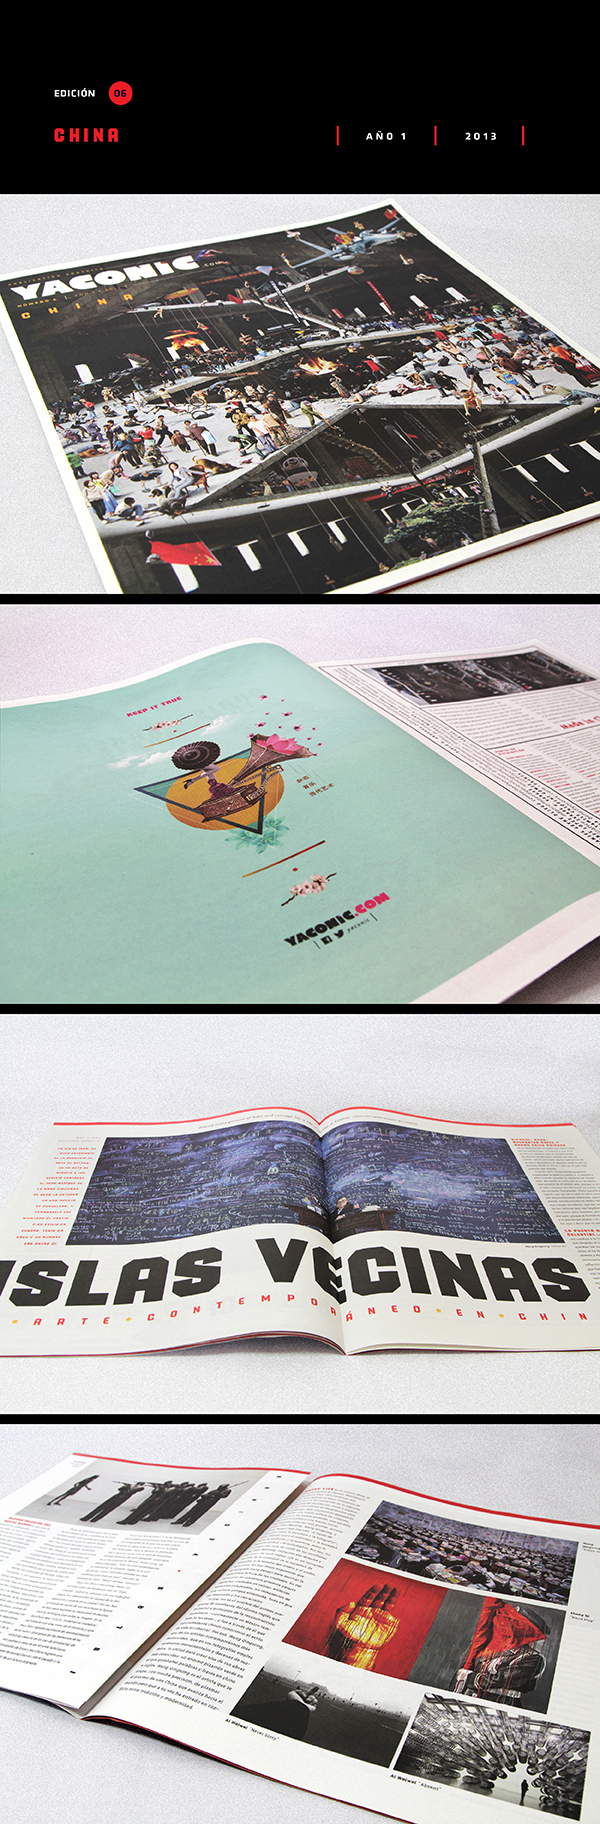 magazine Mexican editorial design FREEE cultural publishing  